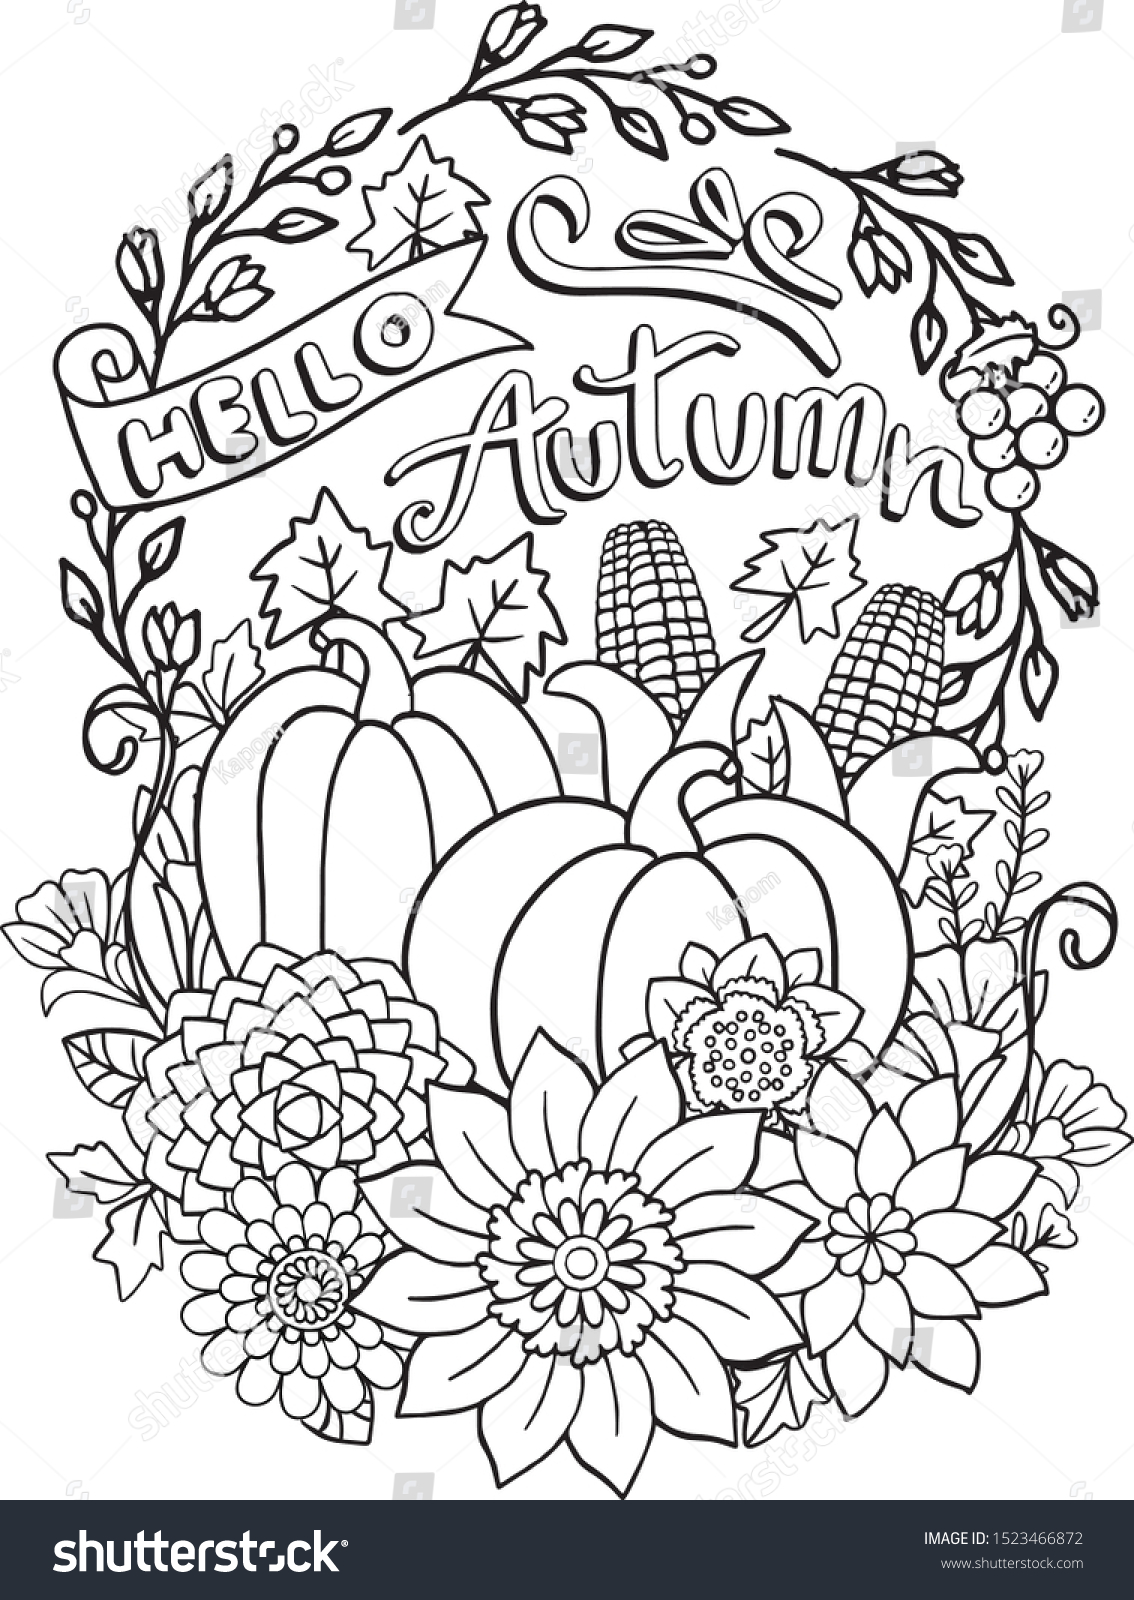 Adult fall coloring pages images stock photos d objects vectors